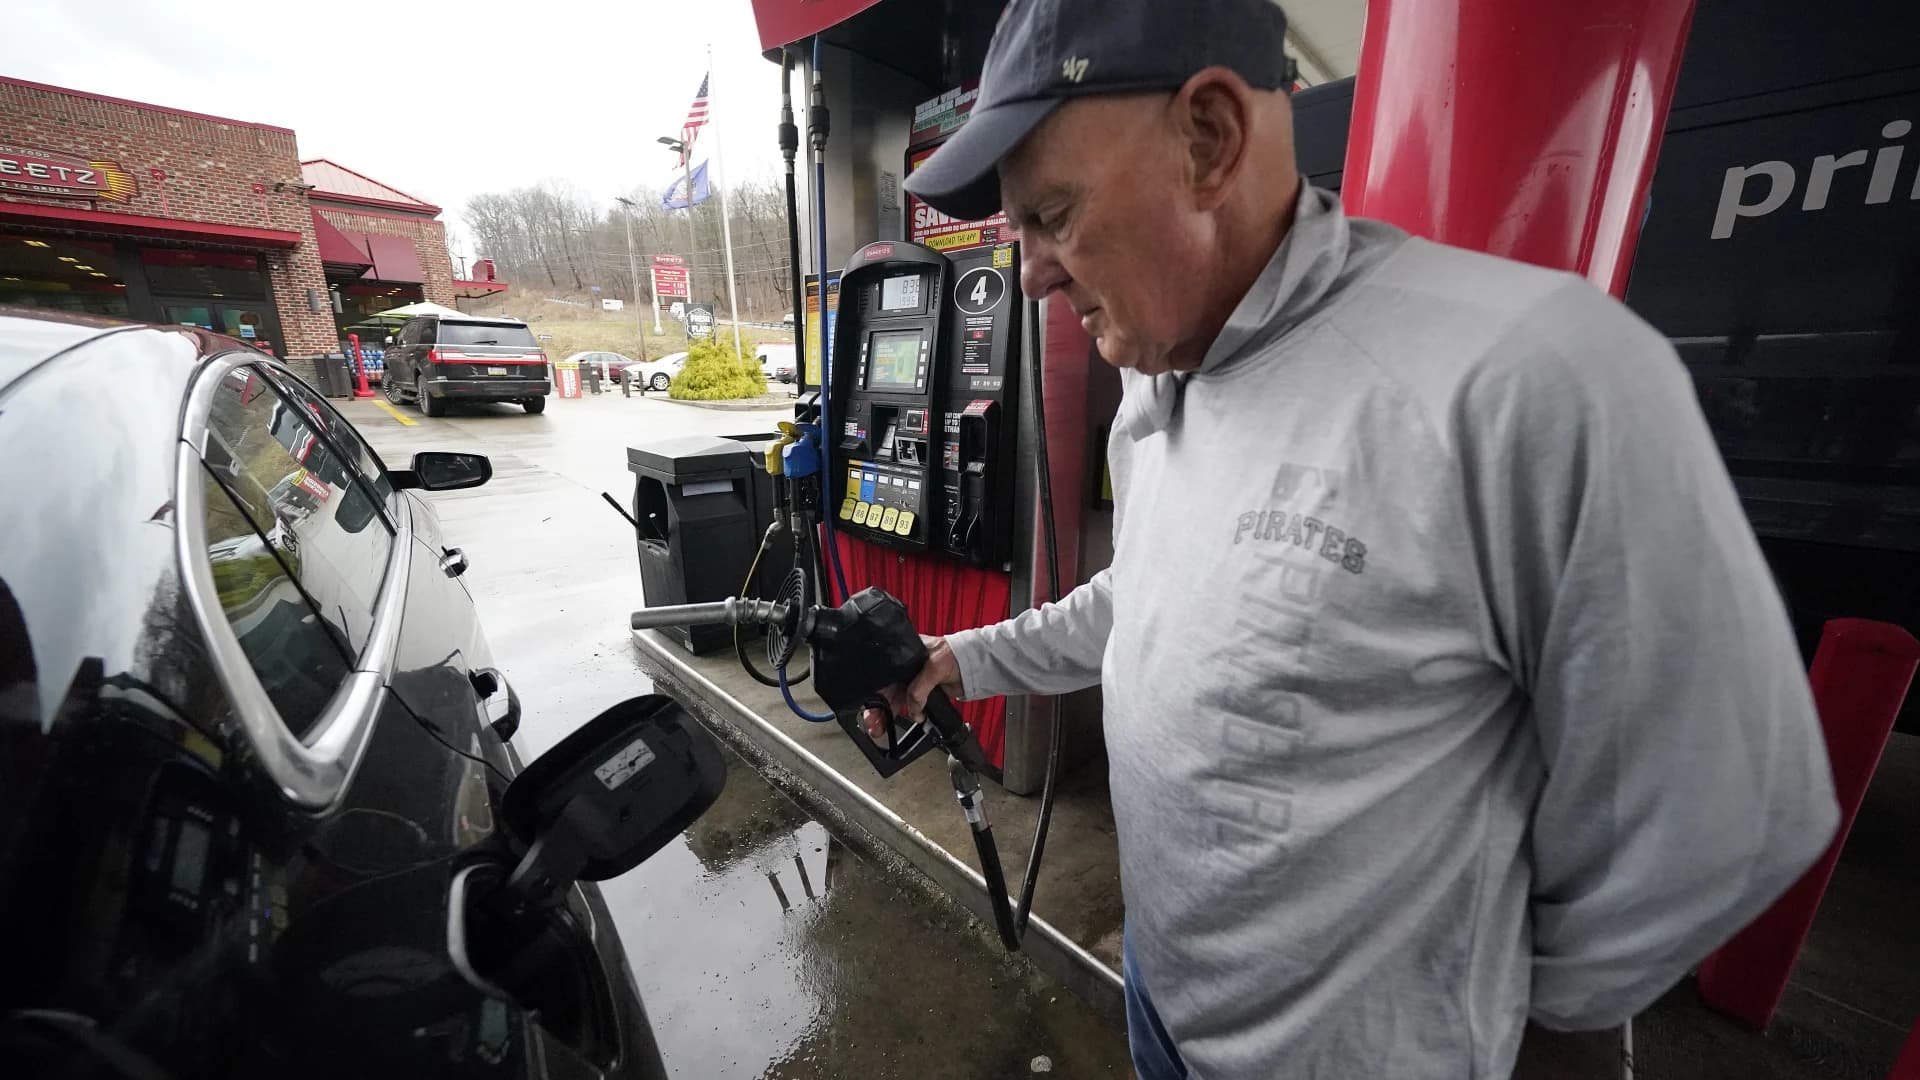 If you suspect gas price gouging at the pump, here’s how to report it.